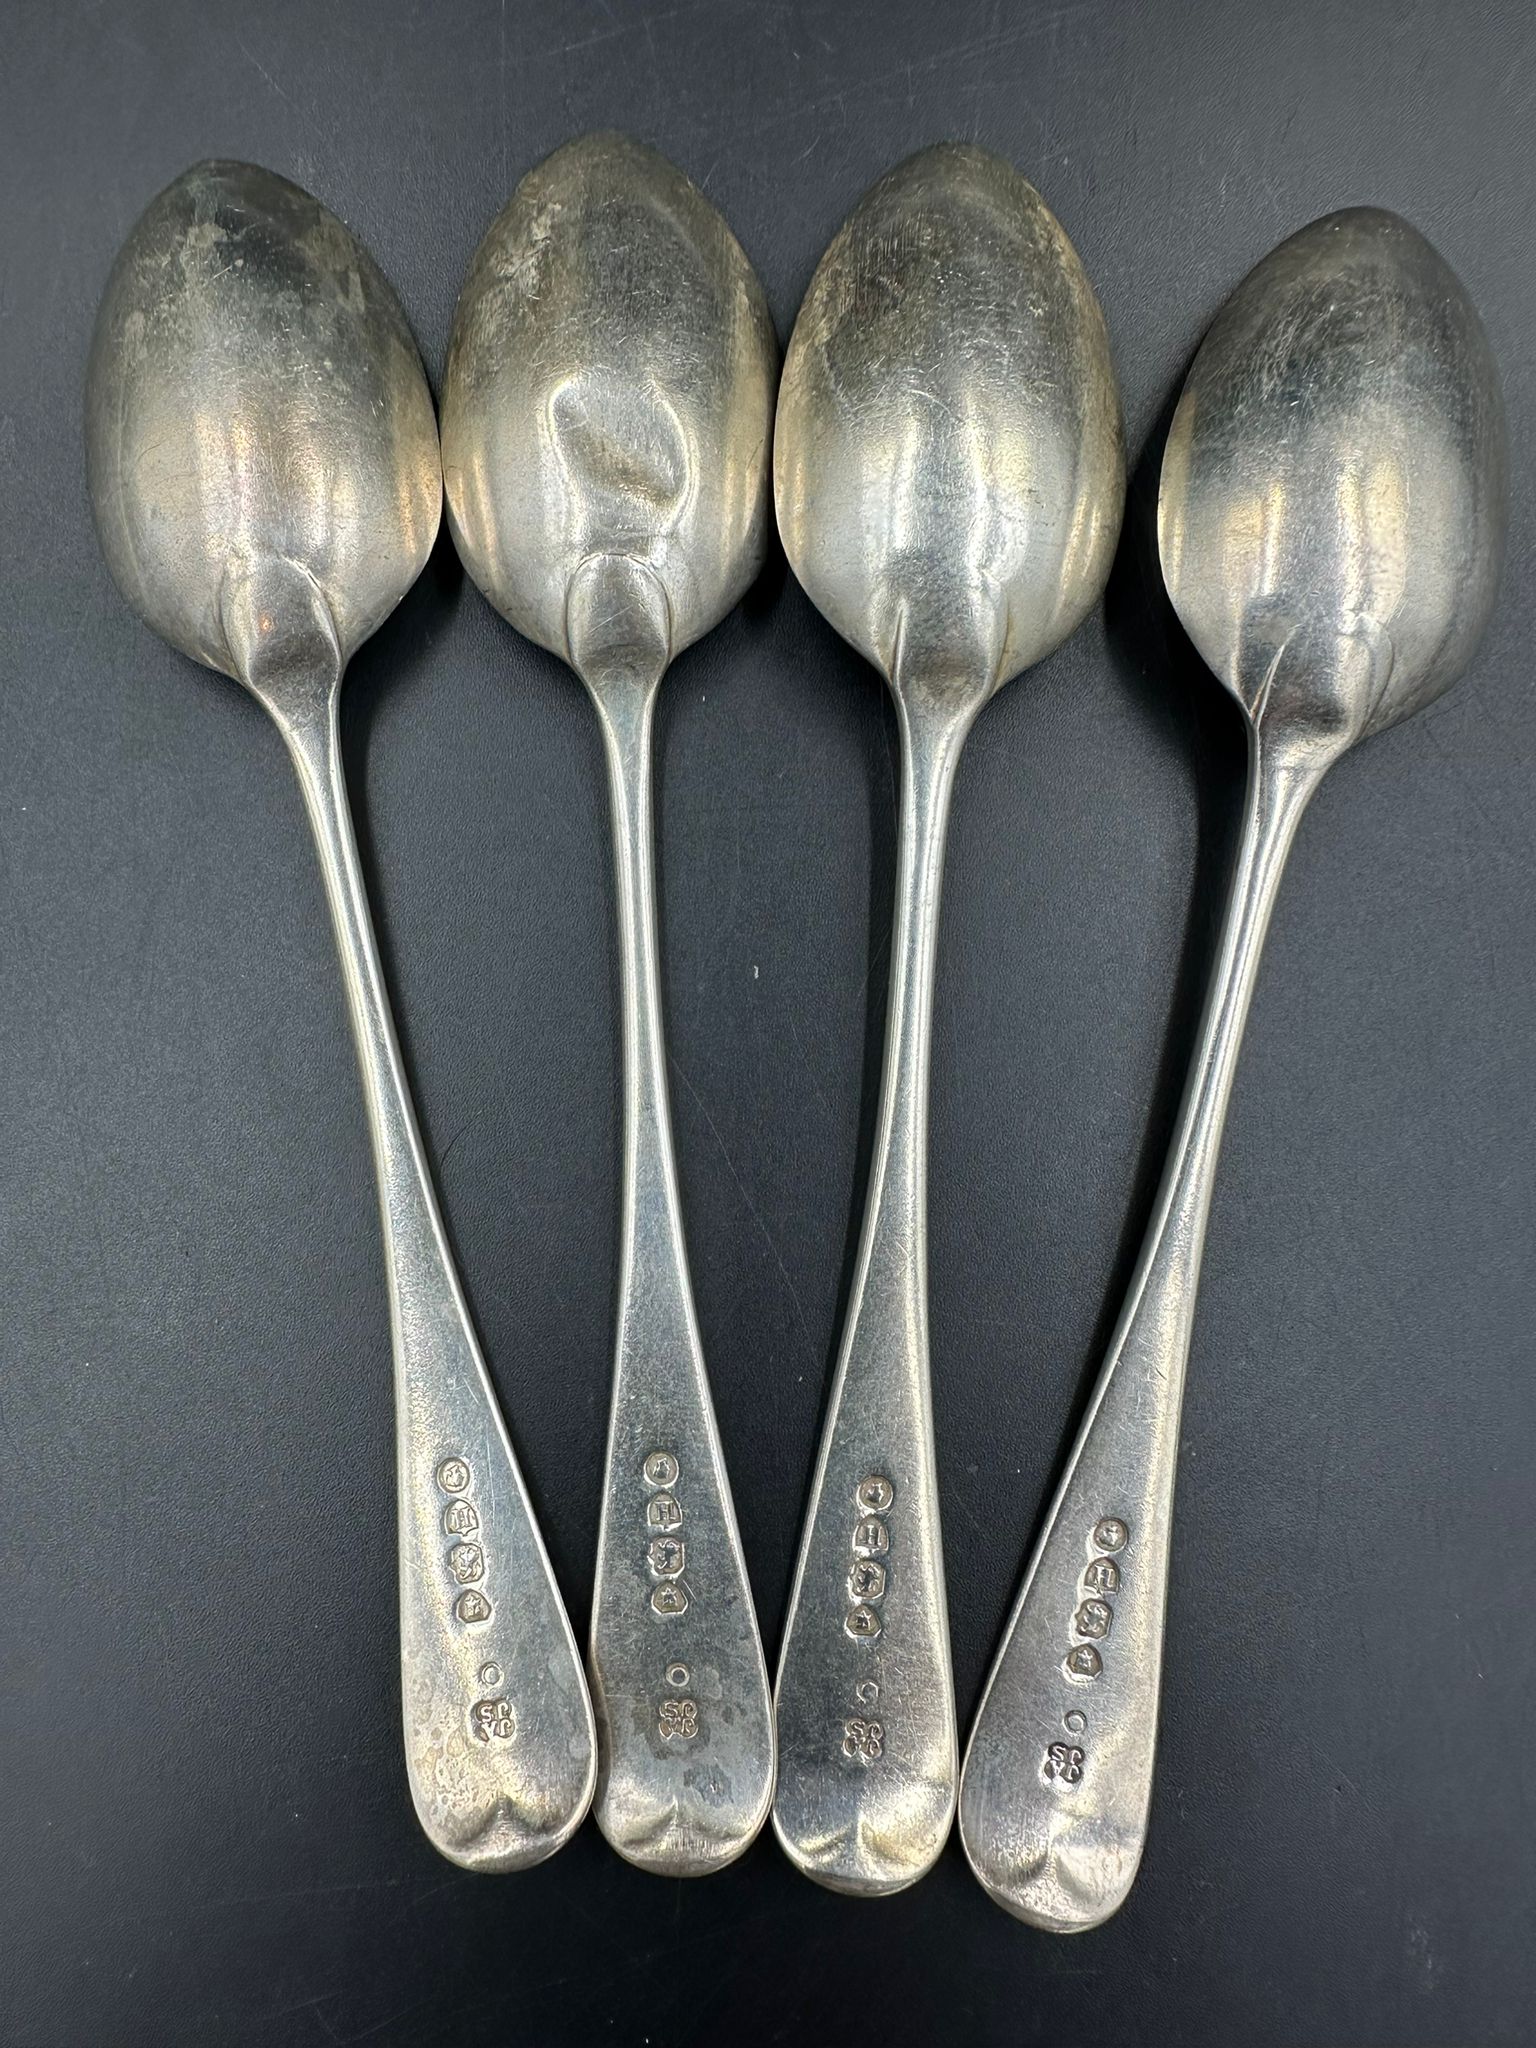 Four Victorian silver teaspoons,hallmarked for London 1883 by Holland, Son & Slater - Image 4 of 4